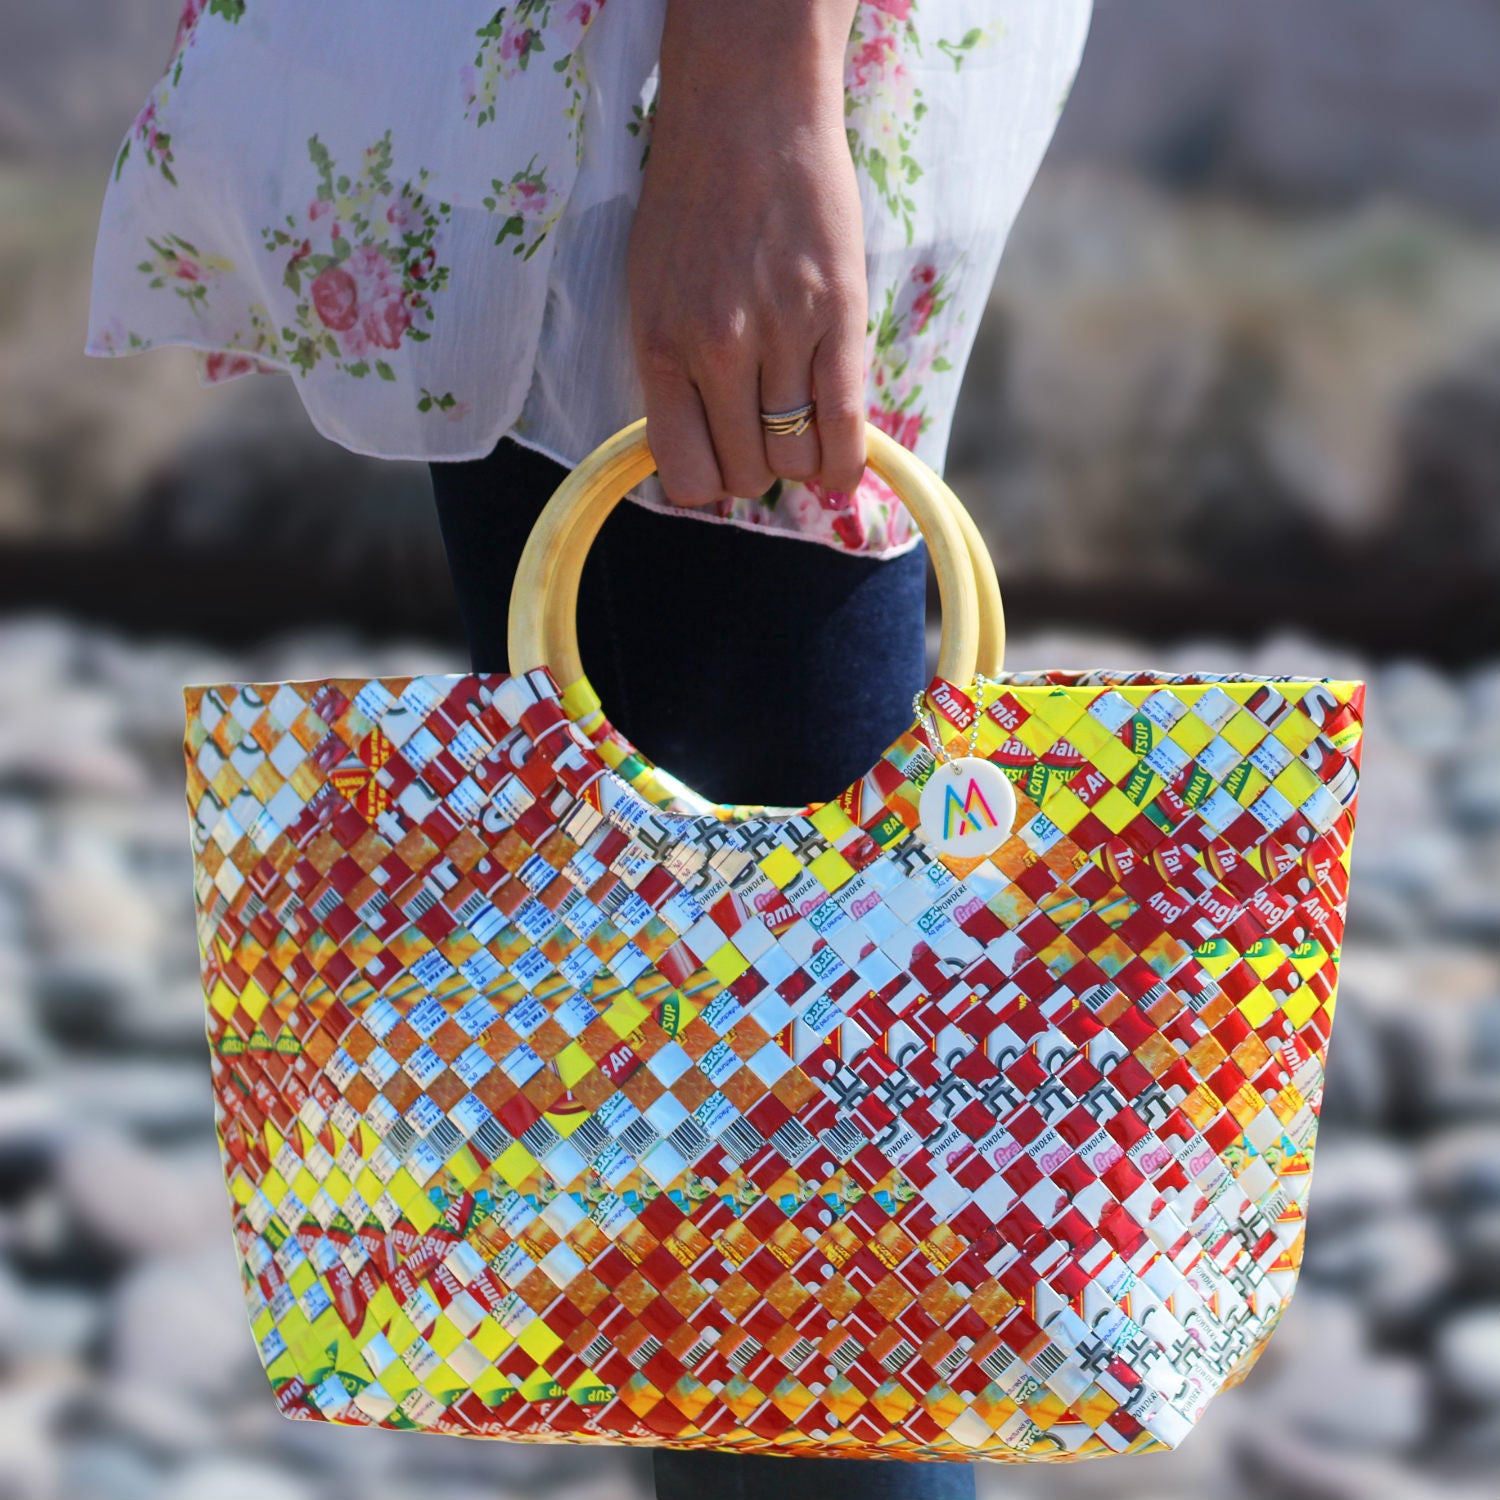 Handmade bag by recycle material, Women's Fashion, Bags & Wallets